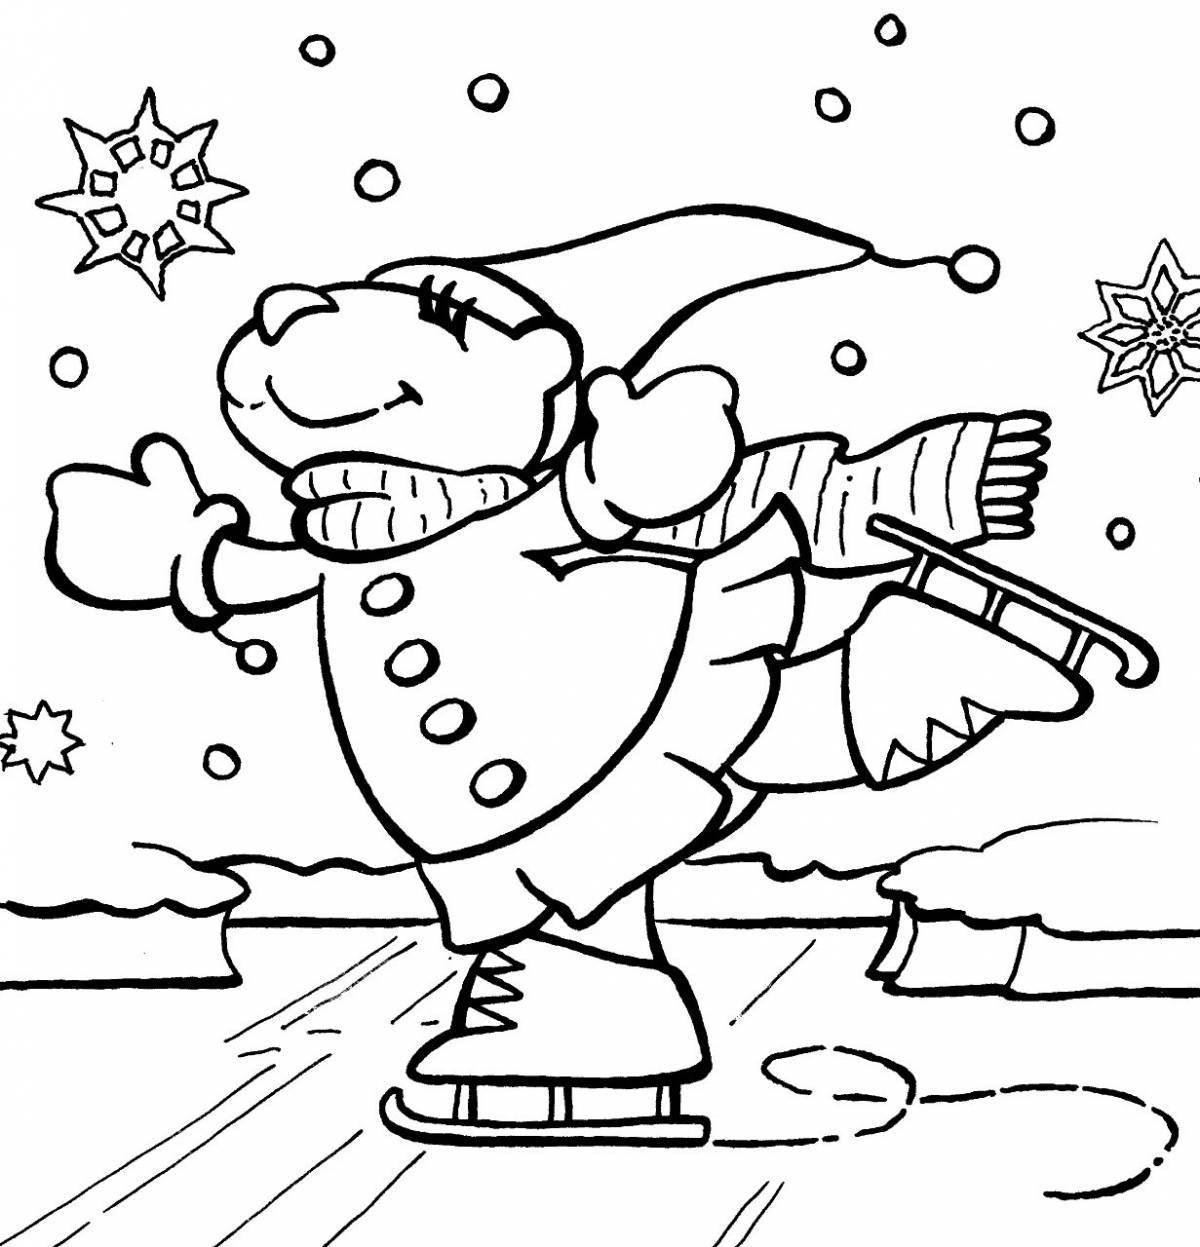 Majestic ice rink coloring page